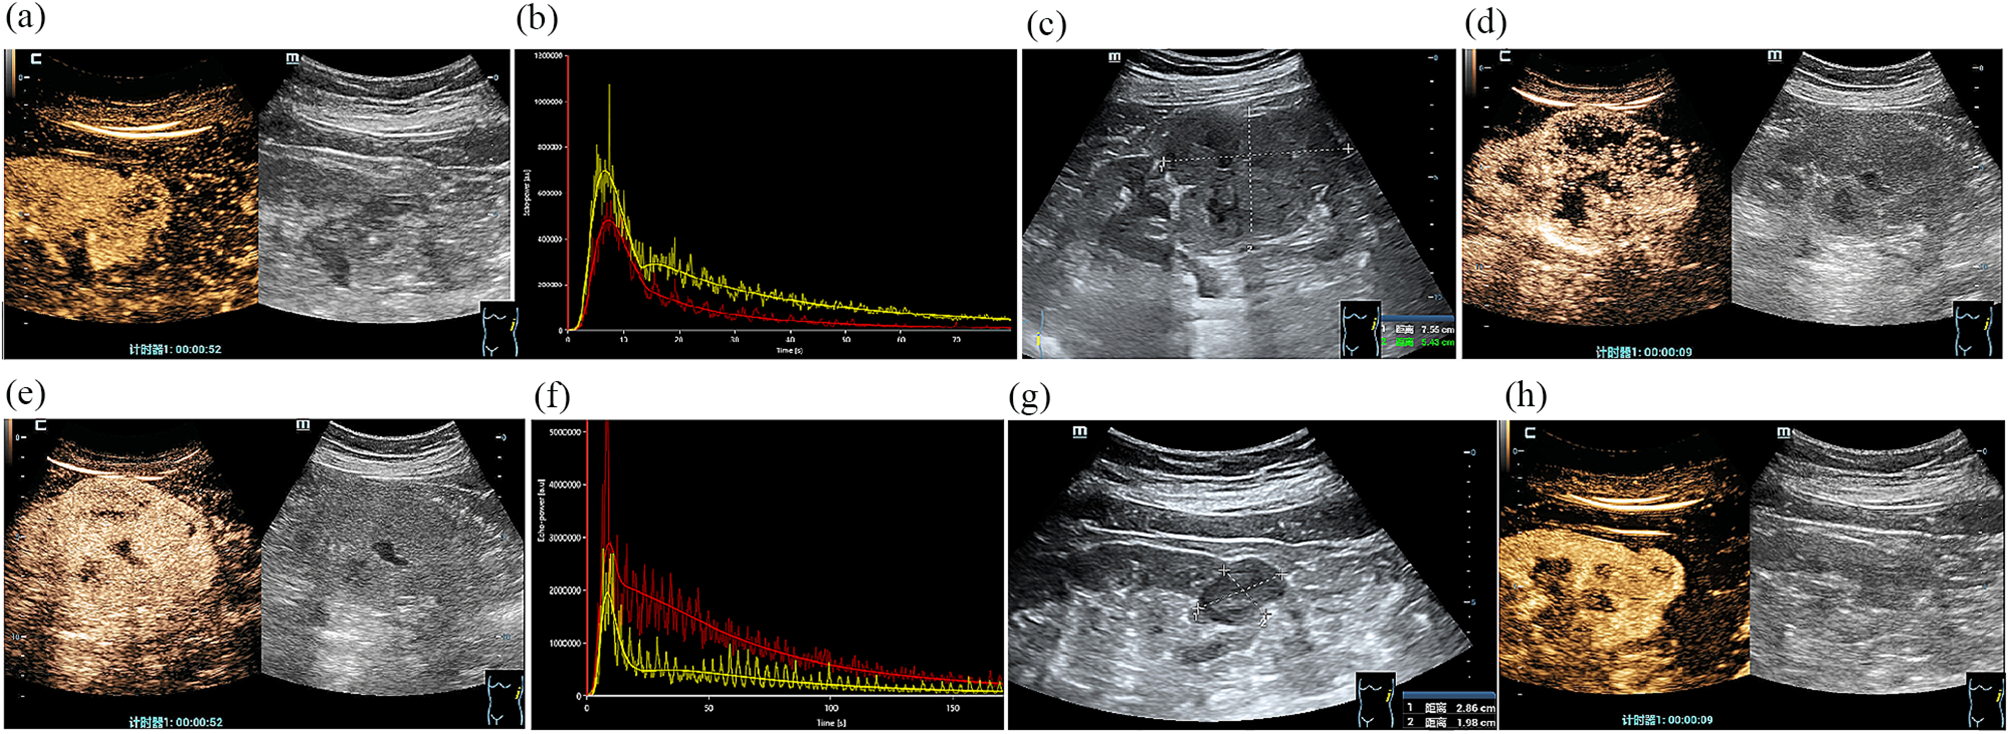 Qualitative and quantitative assessment of non-clear cell renal cell carcinoma using contrast-enhanced ultrasound